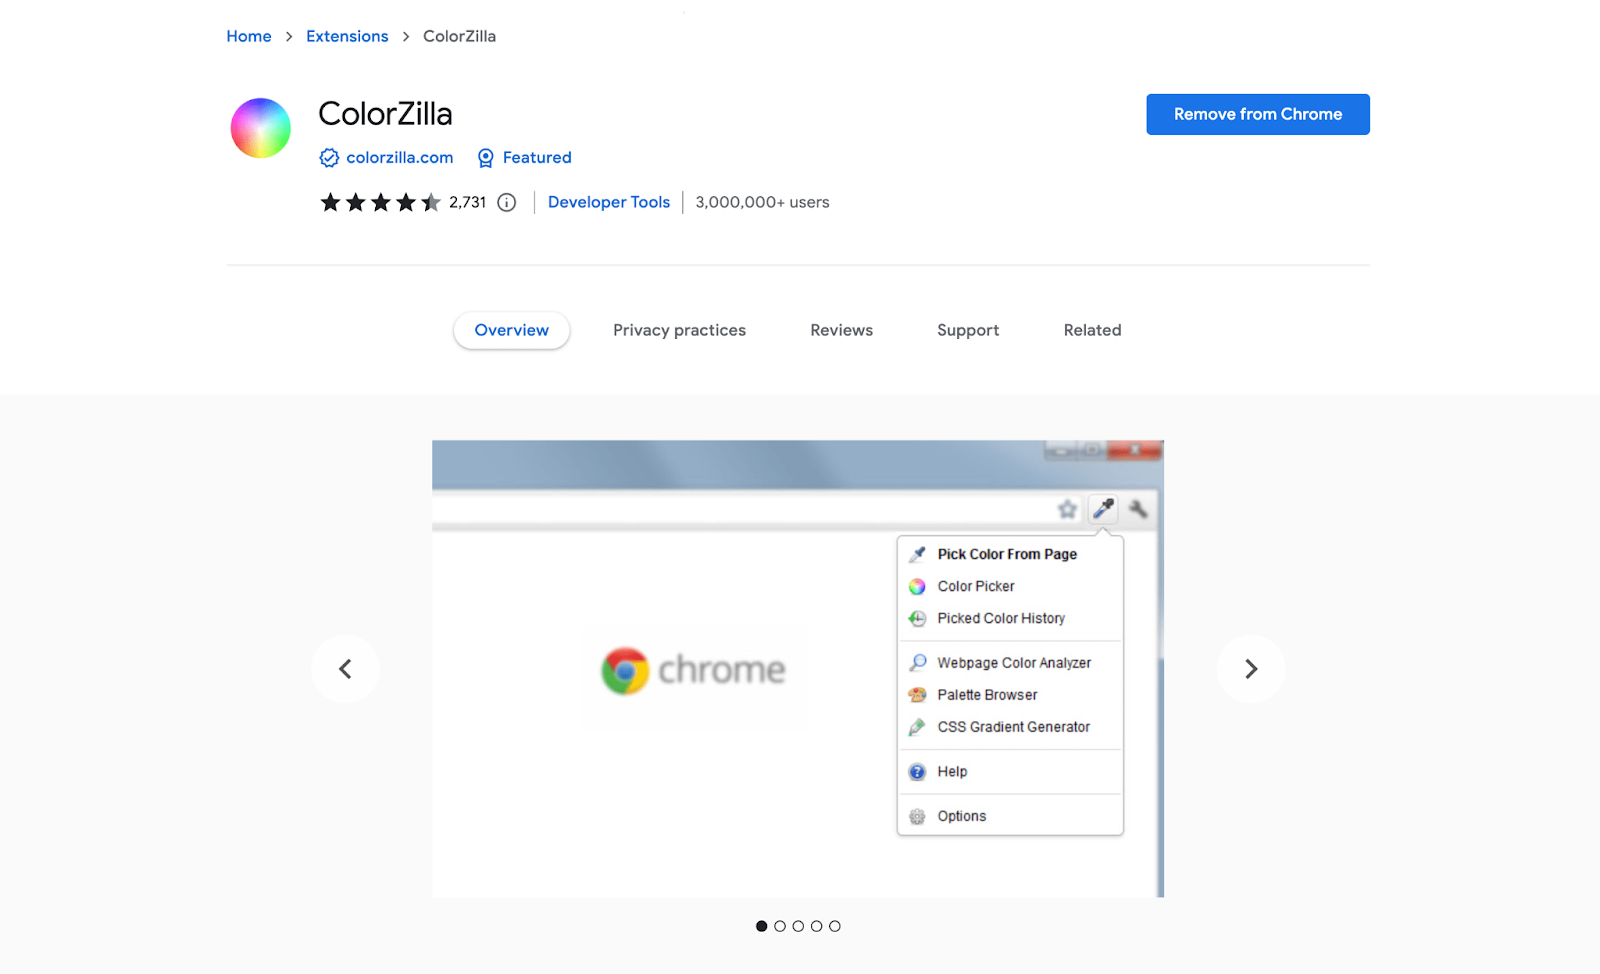 A screenshot of Colorzilla extension from the chrome webstore page